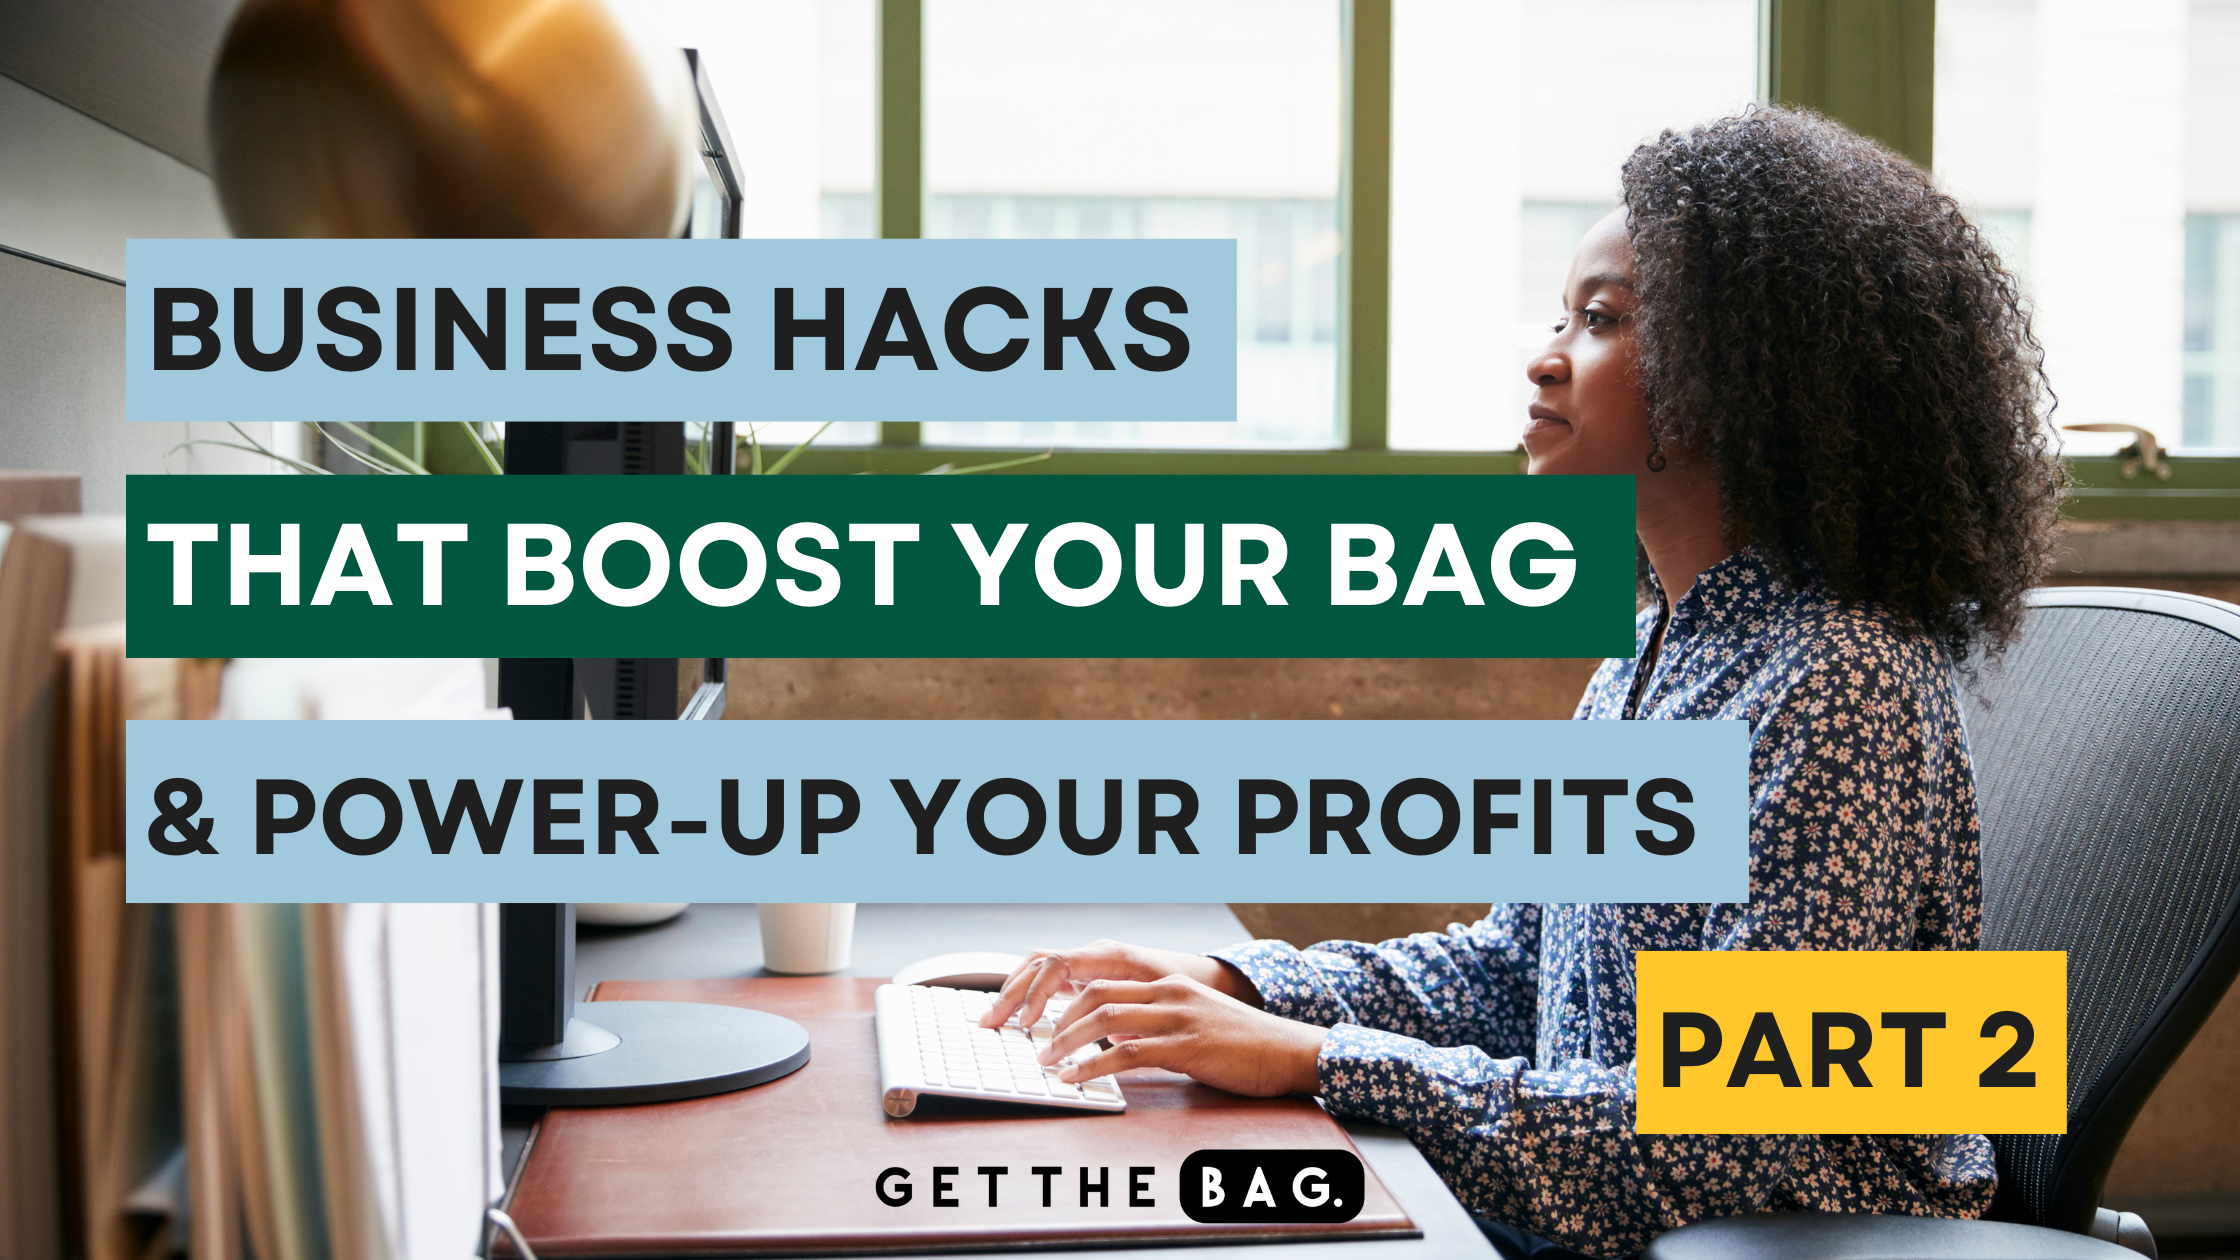 Business Hacks That Boost Your Bag and Power-Up Your Profits - Part 2